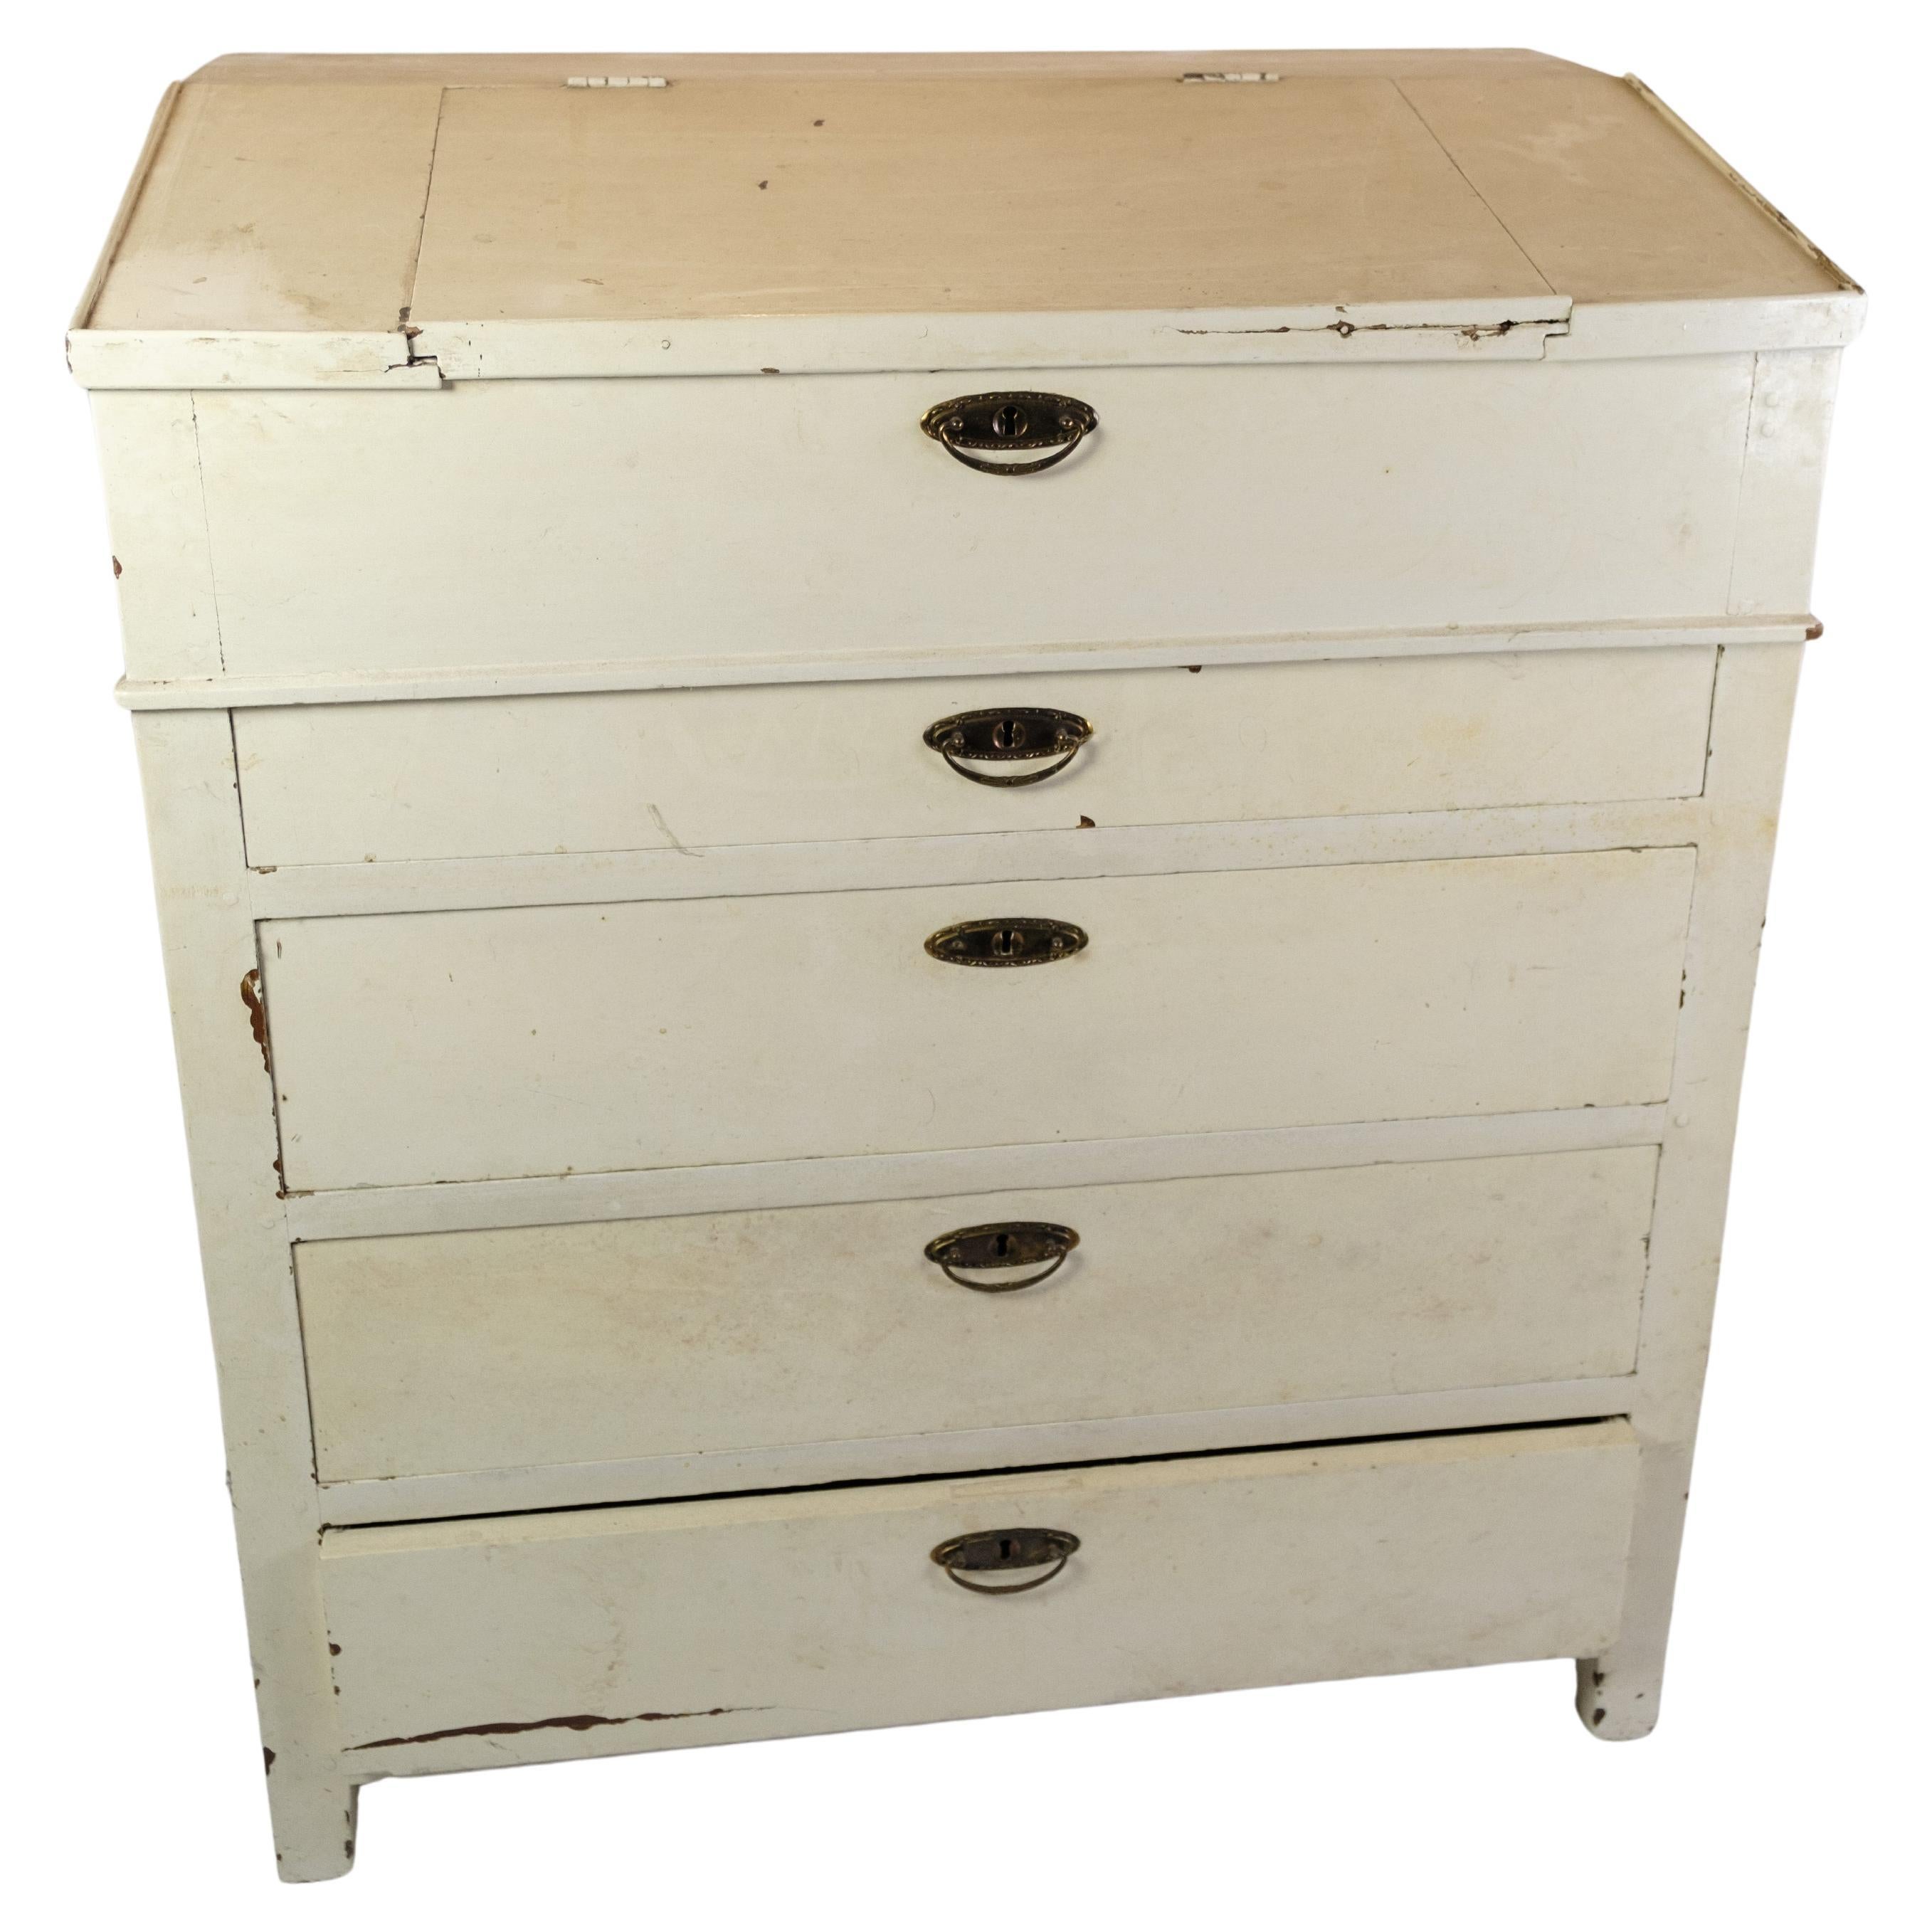 Antique Chest Of Drawers/Desk Painted White From 1890s For Sale